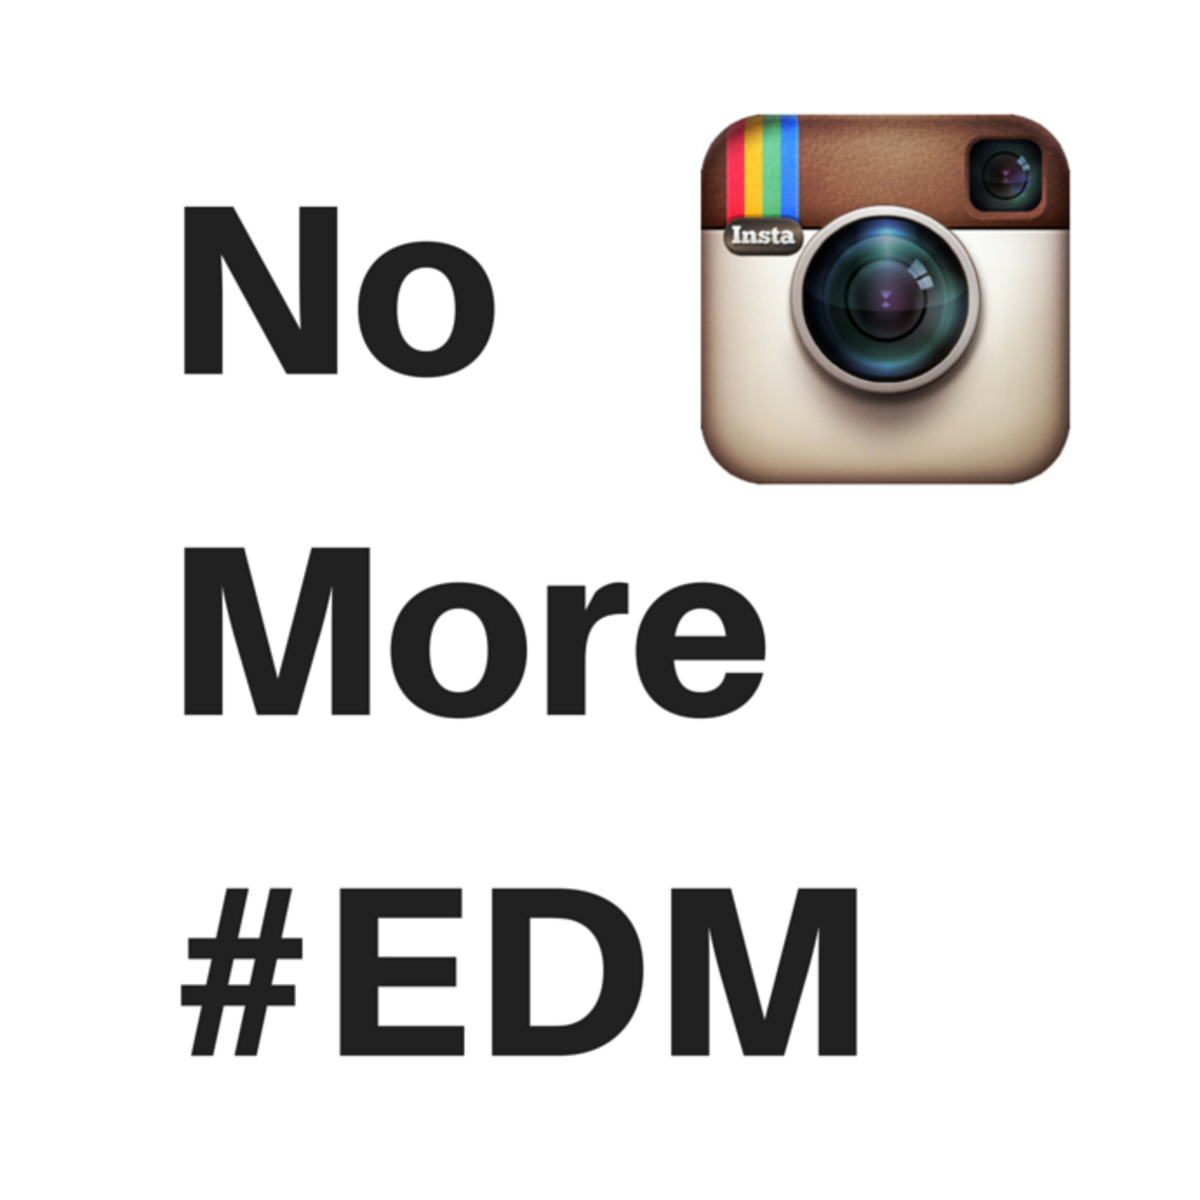 #EDM Tag Banned On Instagram